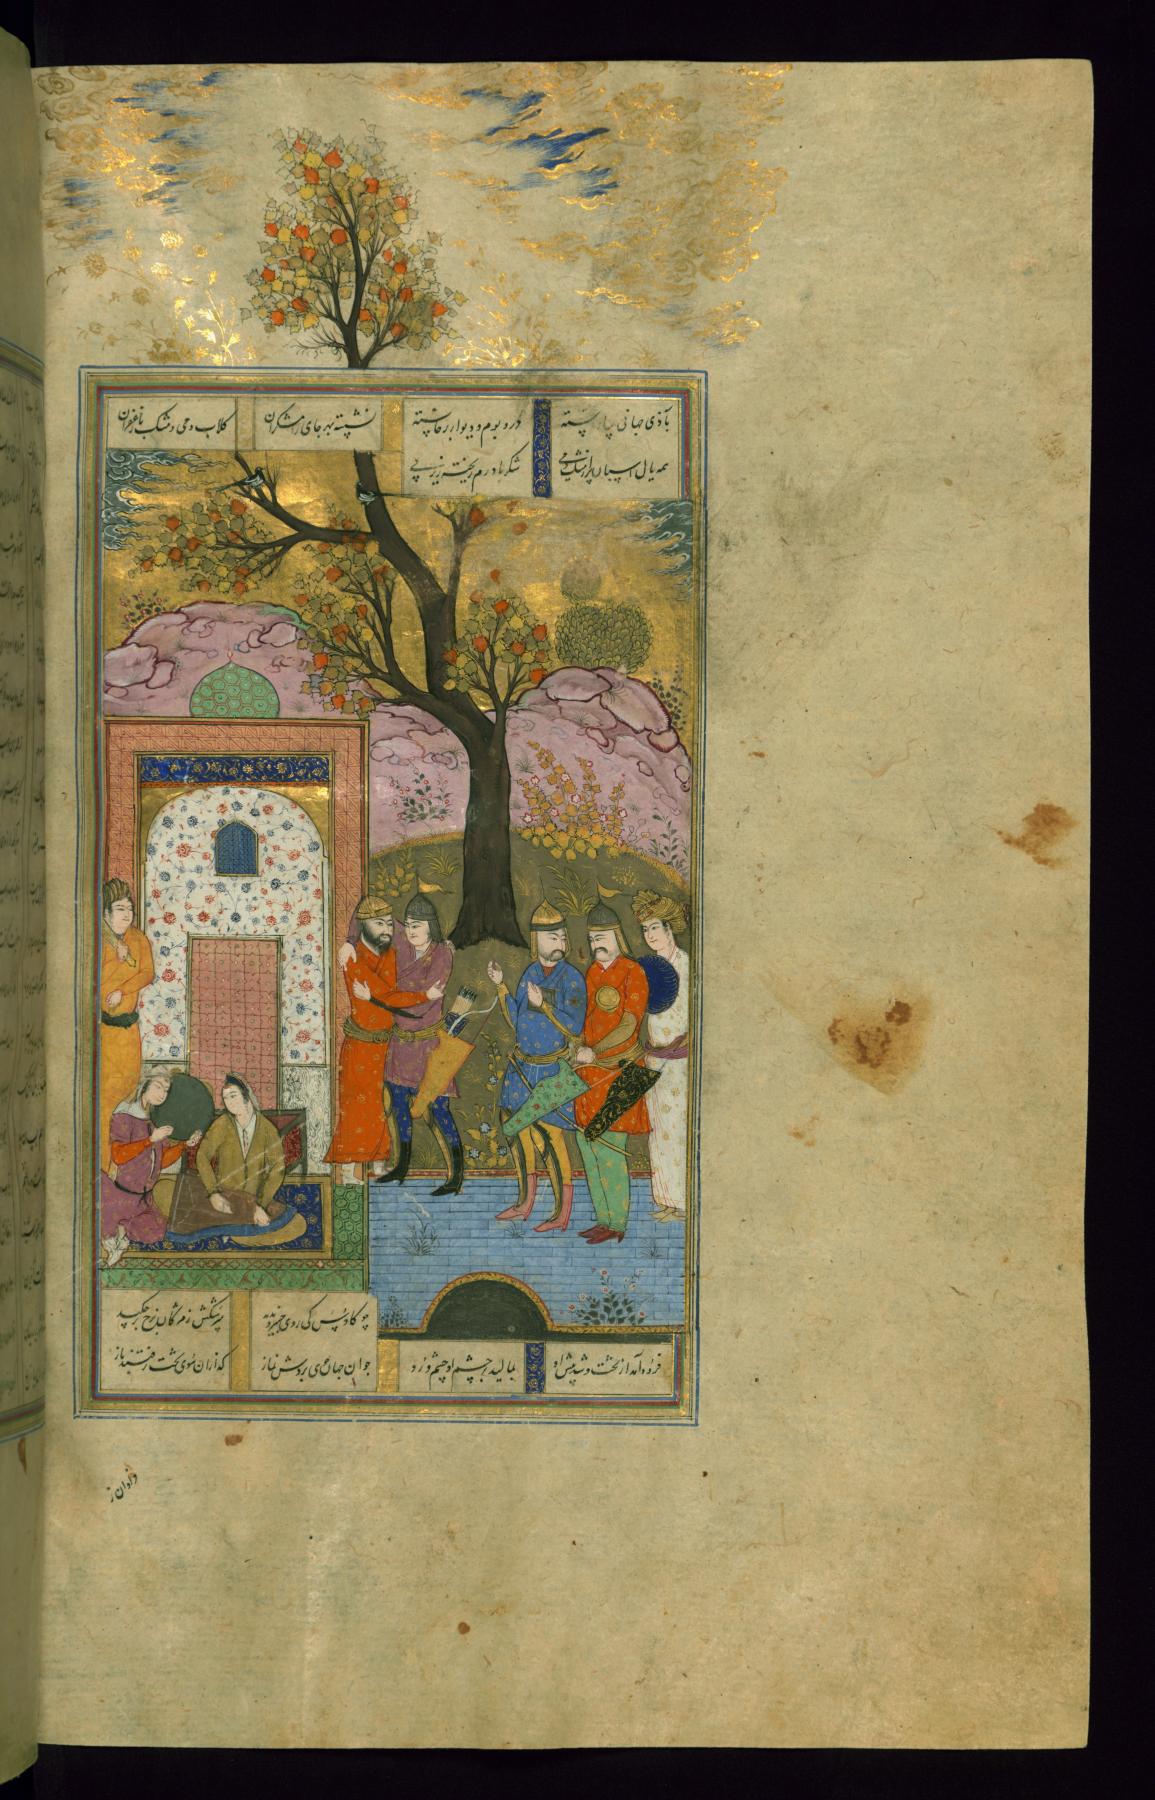 Image for Kay Kavus Receives Kay Khusraw on his Arrival from Turan